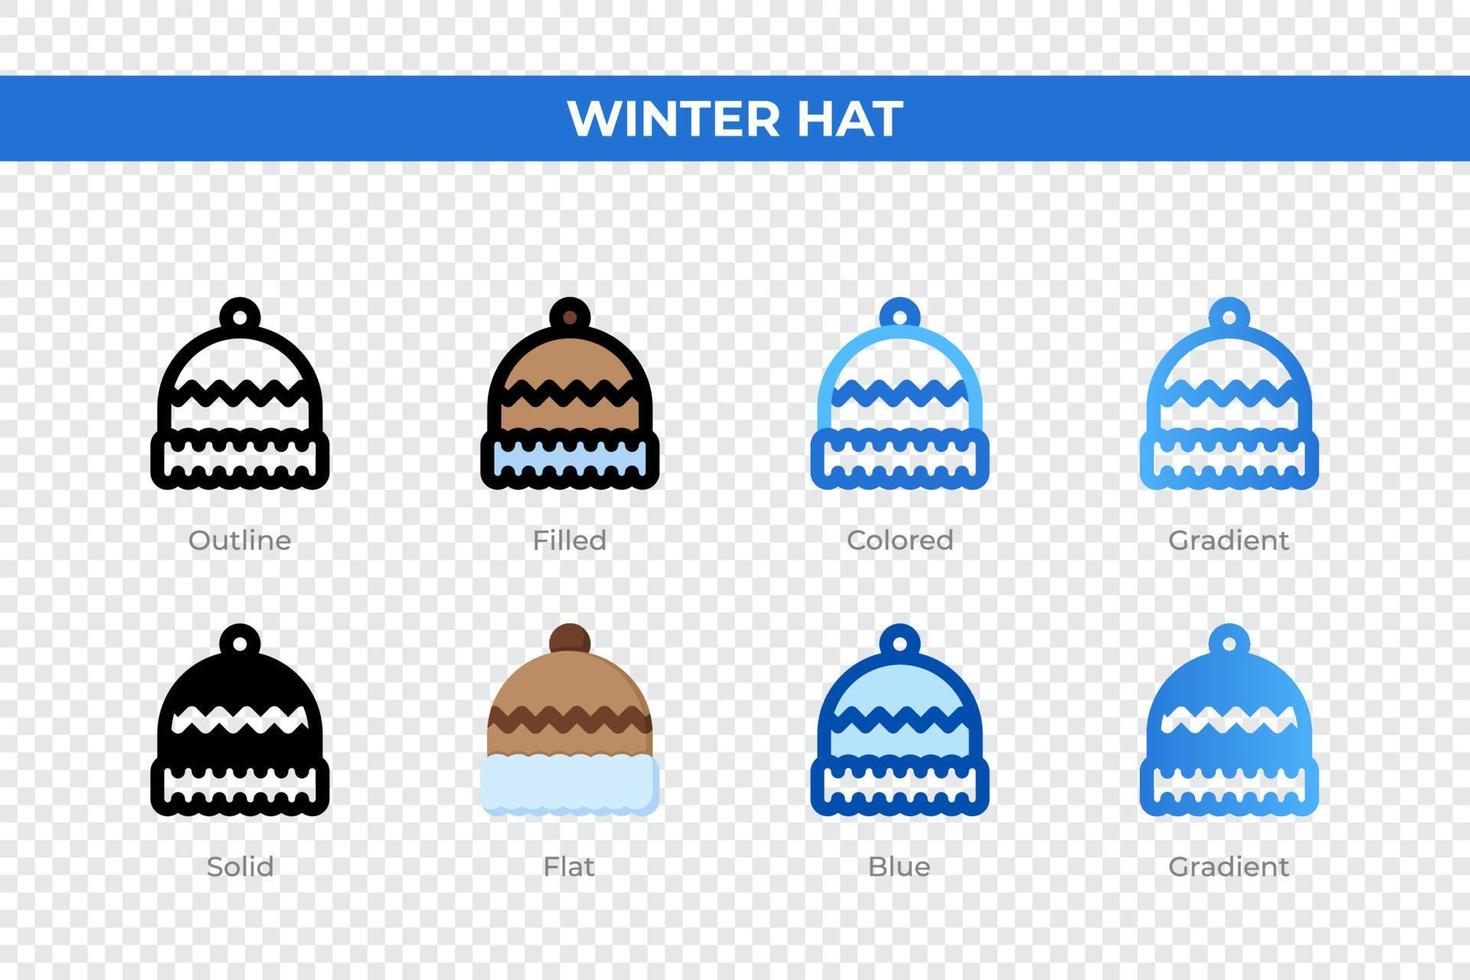 Winter hat icons in different style. Winter hat icons set. Holiday symbol. Different style icons set. Vector illustration